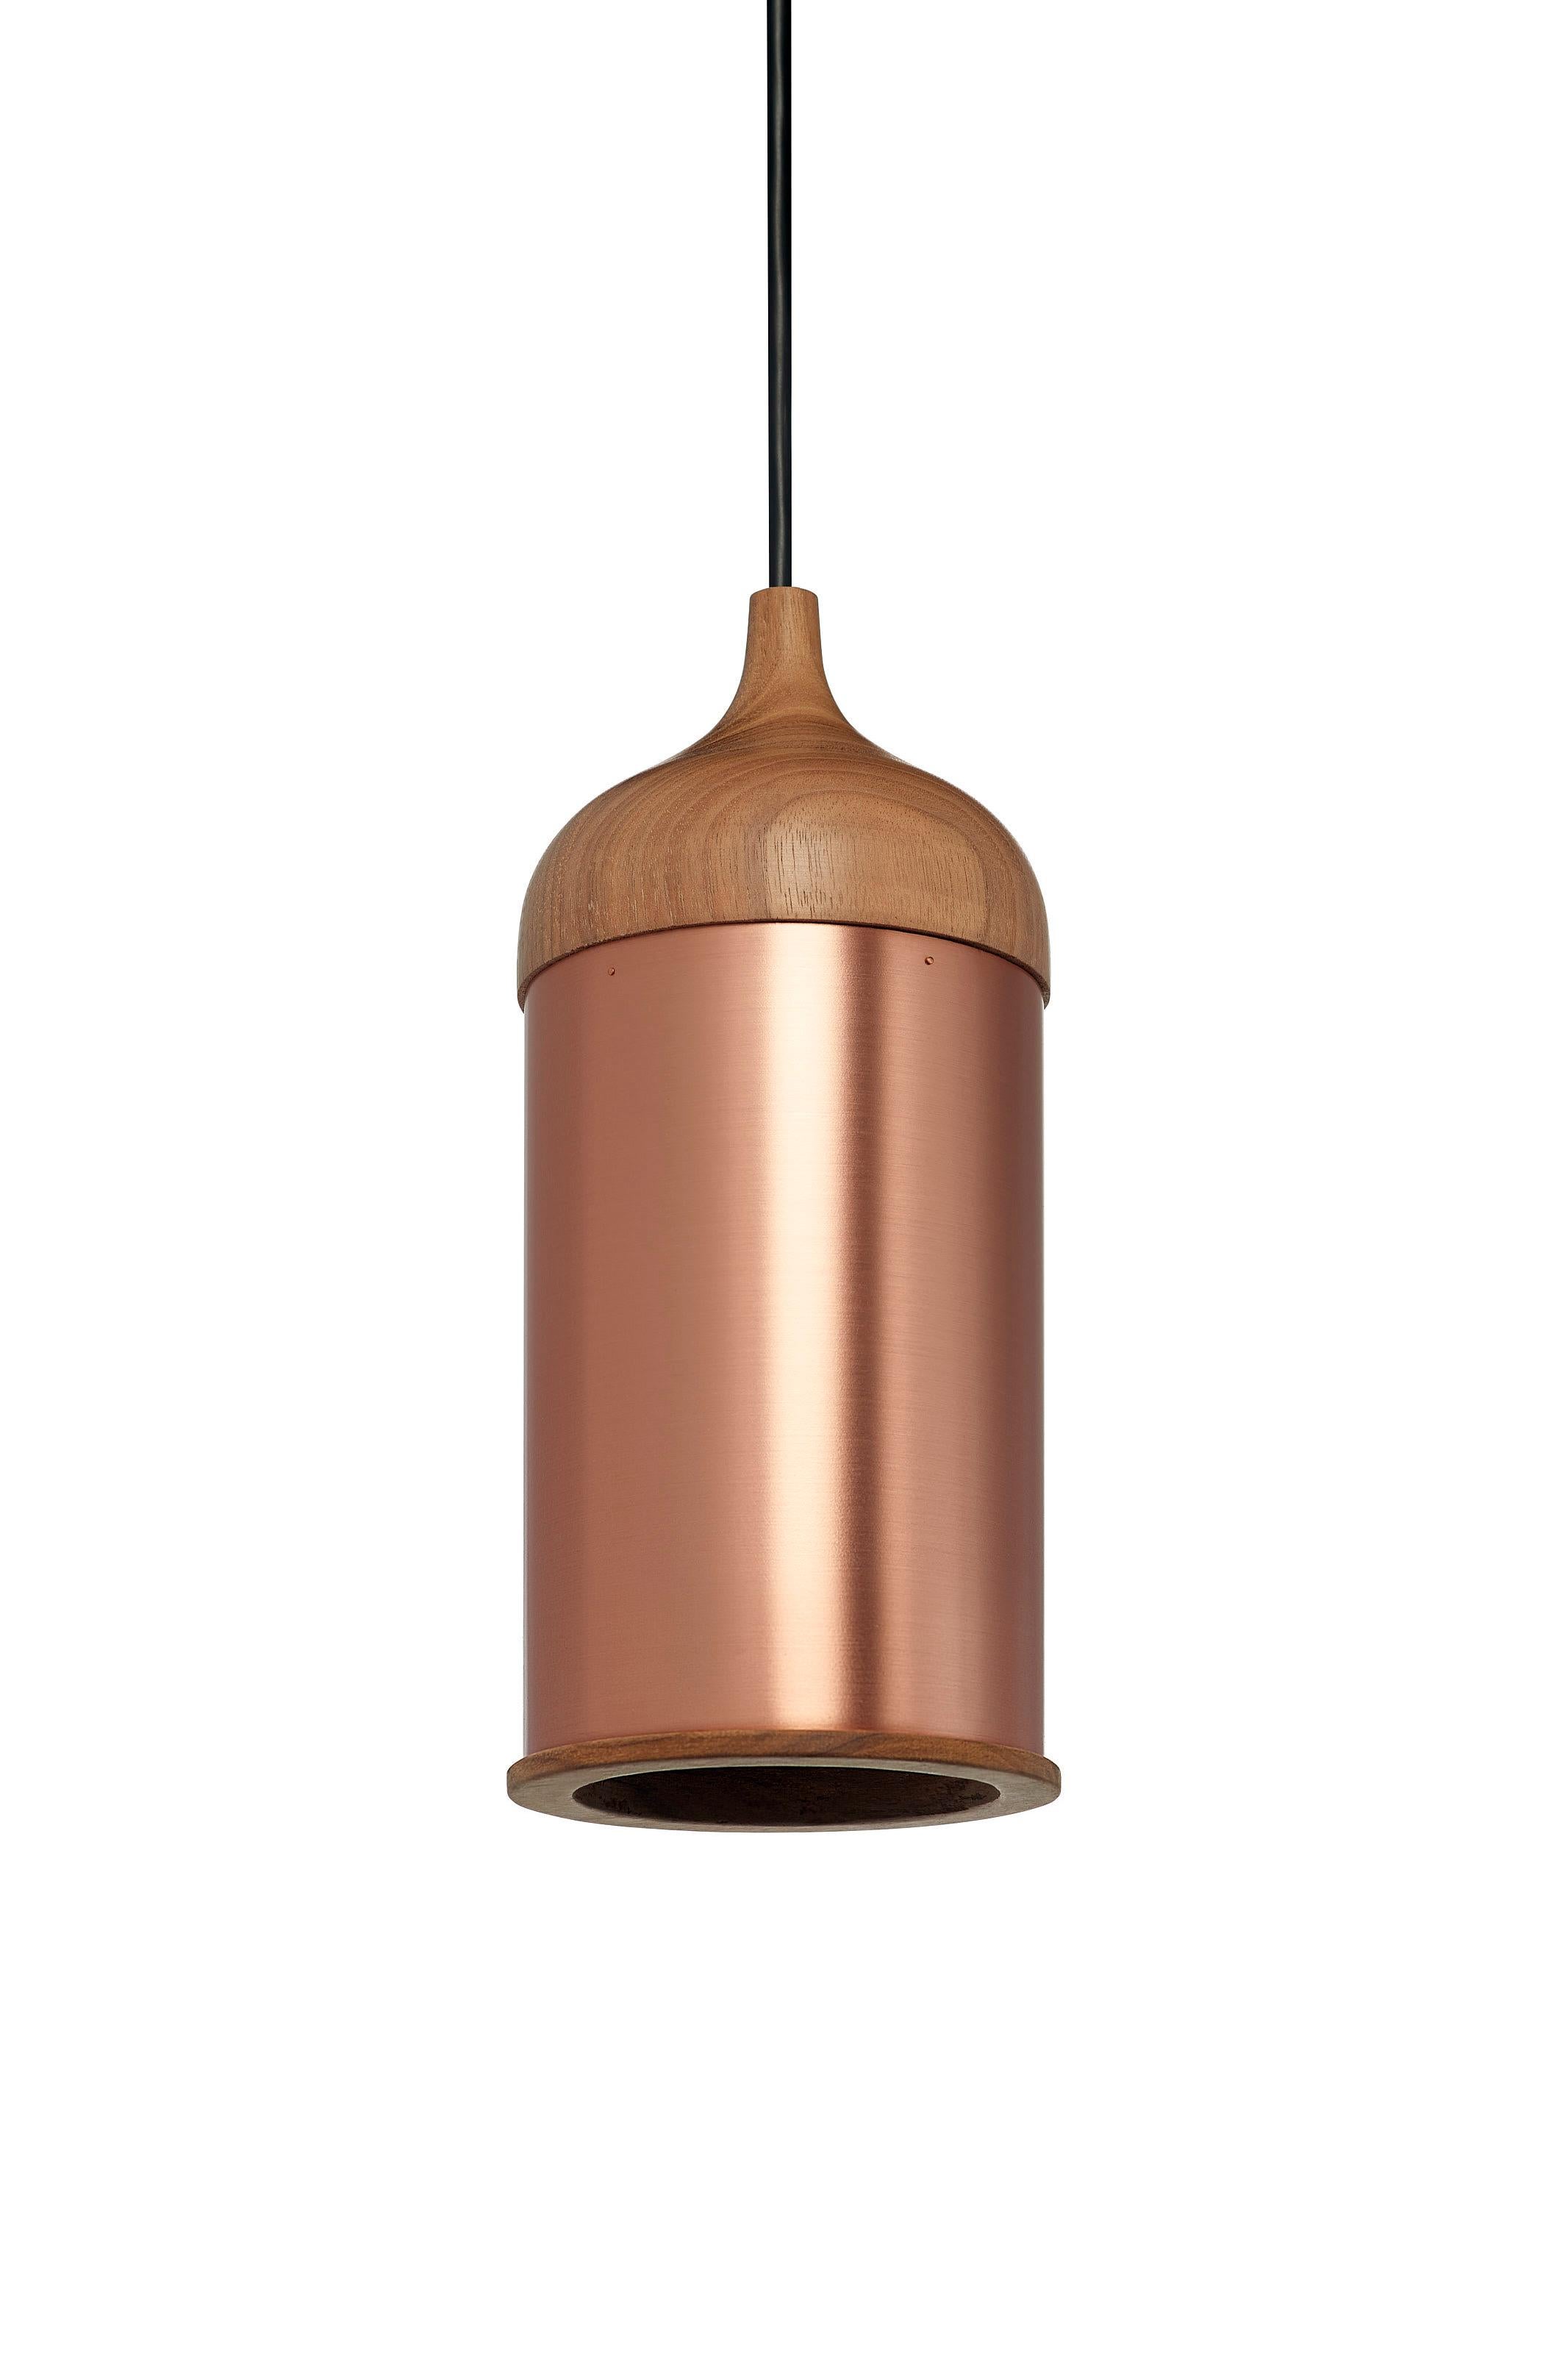 A cool led light reflects inside the copper pendant lamp. It creates a clear light center which is surrounded by a warm copper semblance. Walnut parts fits precisely in the ends of the copper tube. The parts are shaped on the same type of machine,